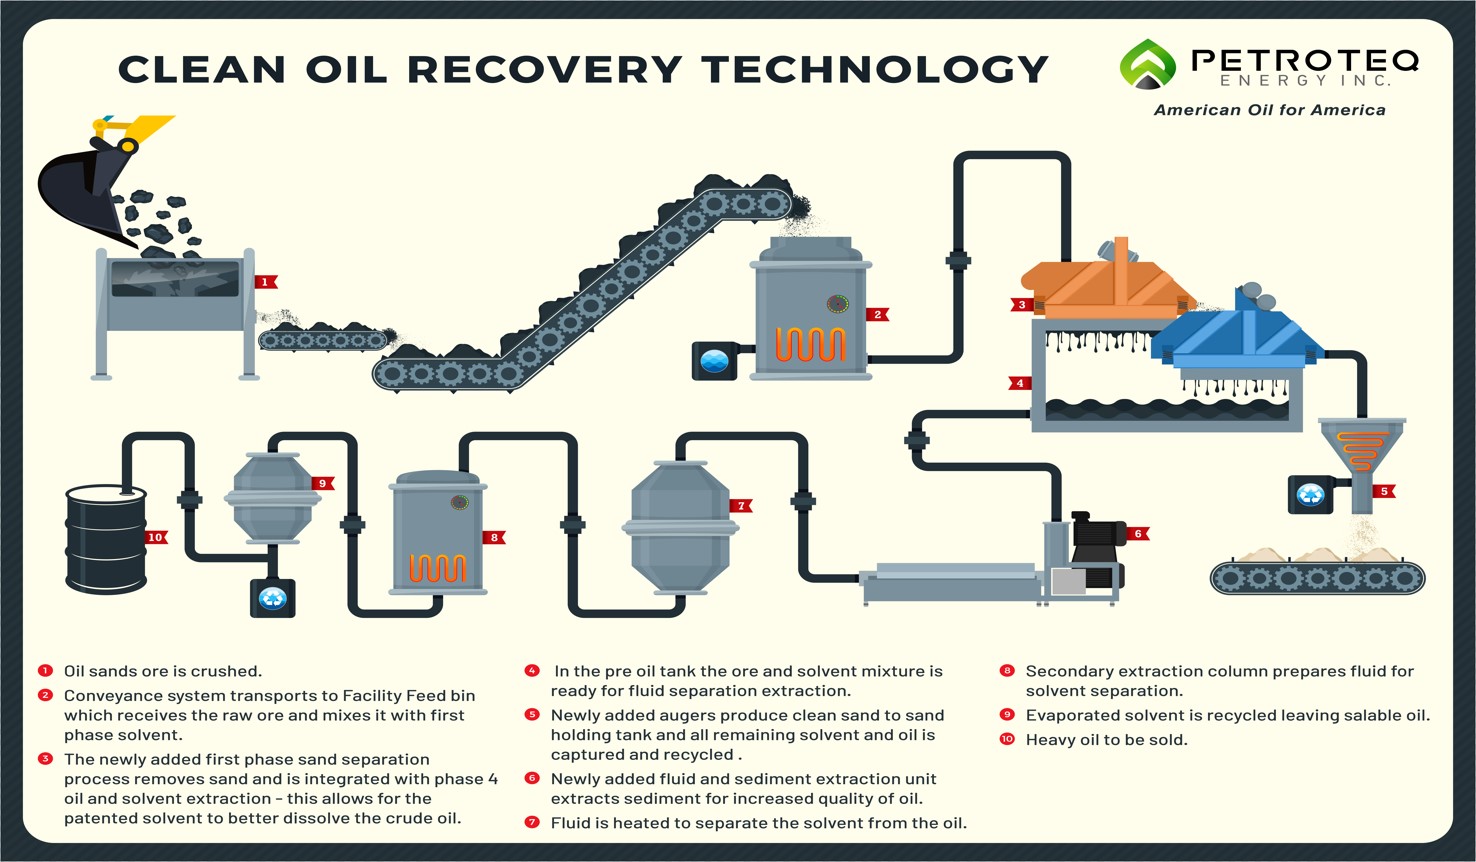 Petroteq’s Clean Oil Recovery Technology Infographic